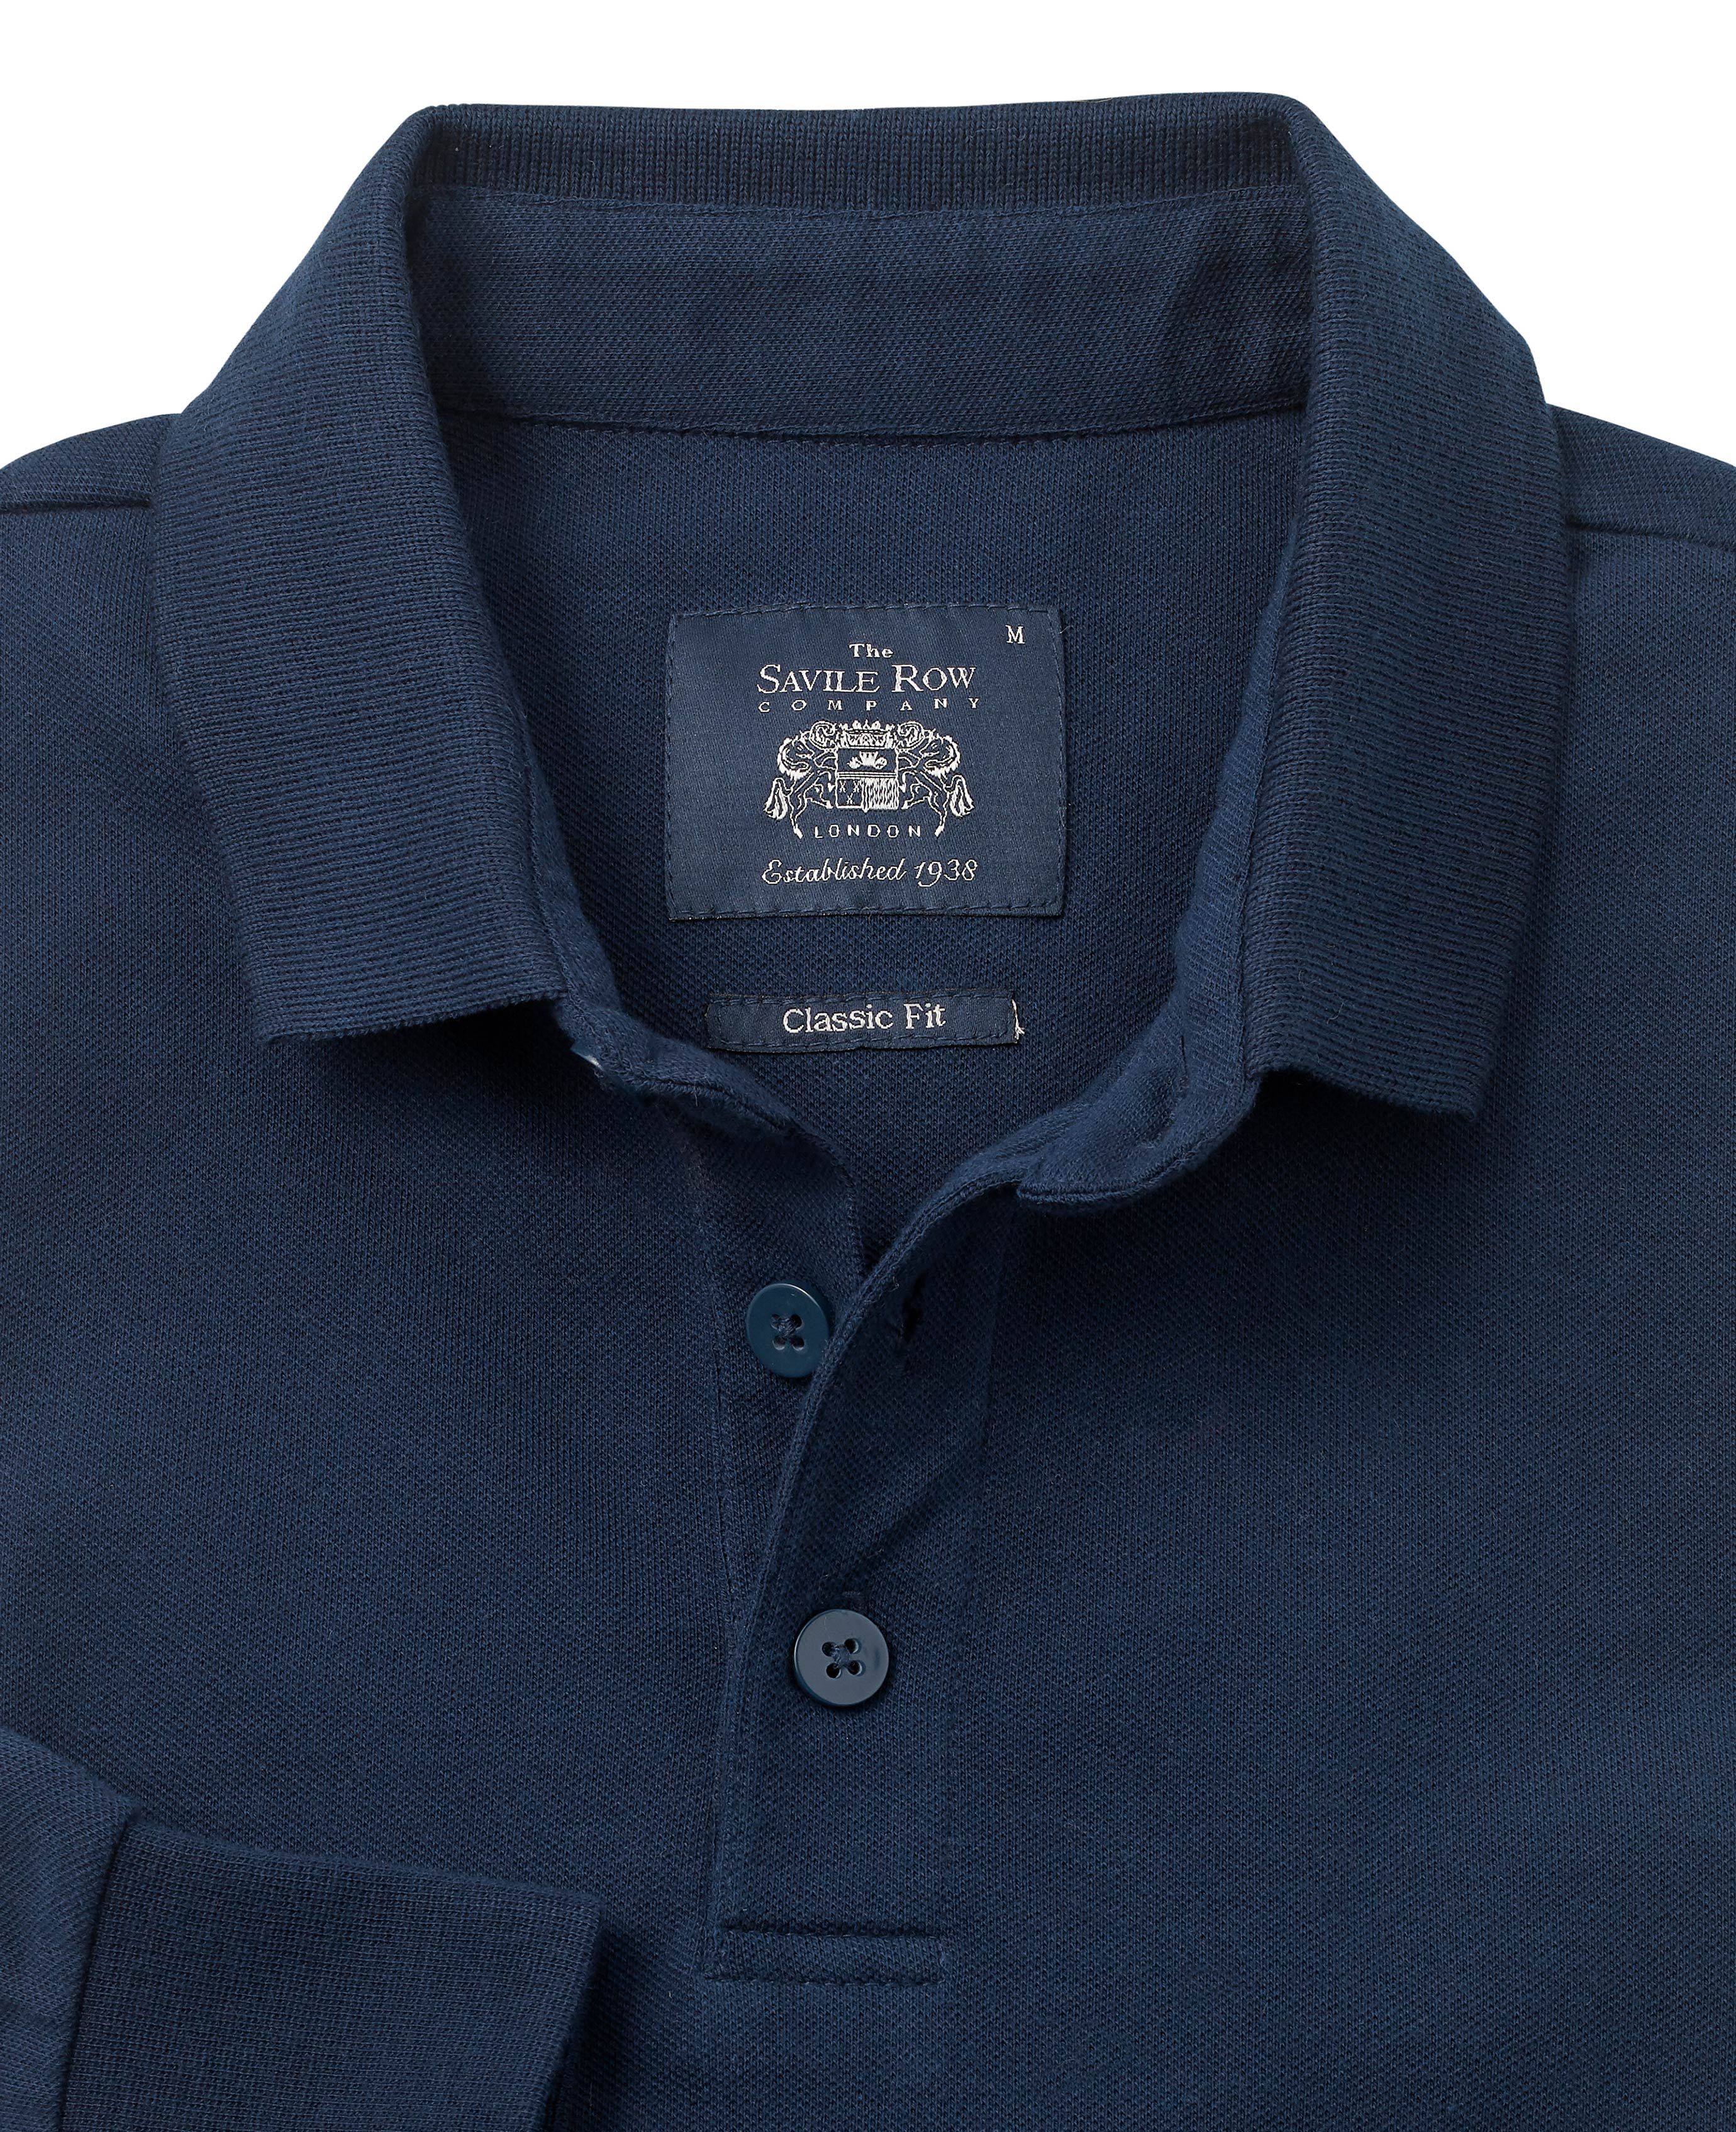 Navy Classic Fit Long Sleeve Polo Shirt .